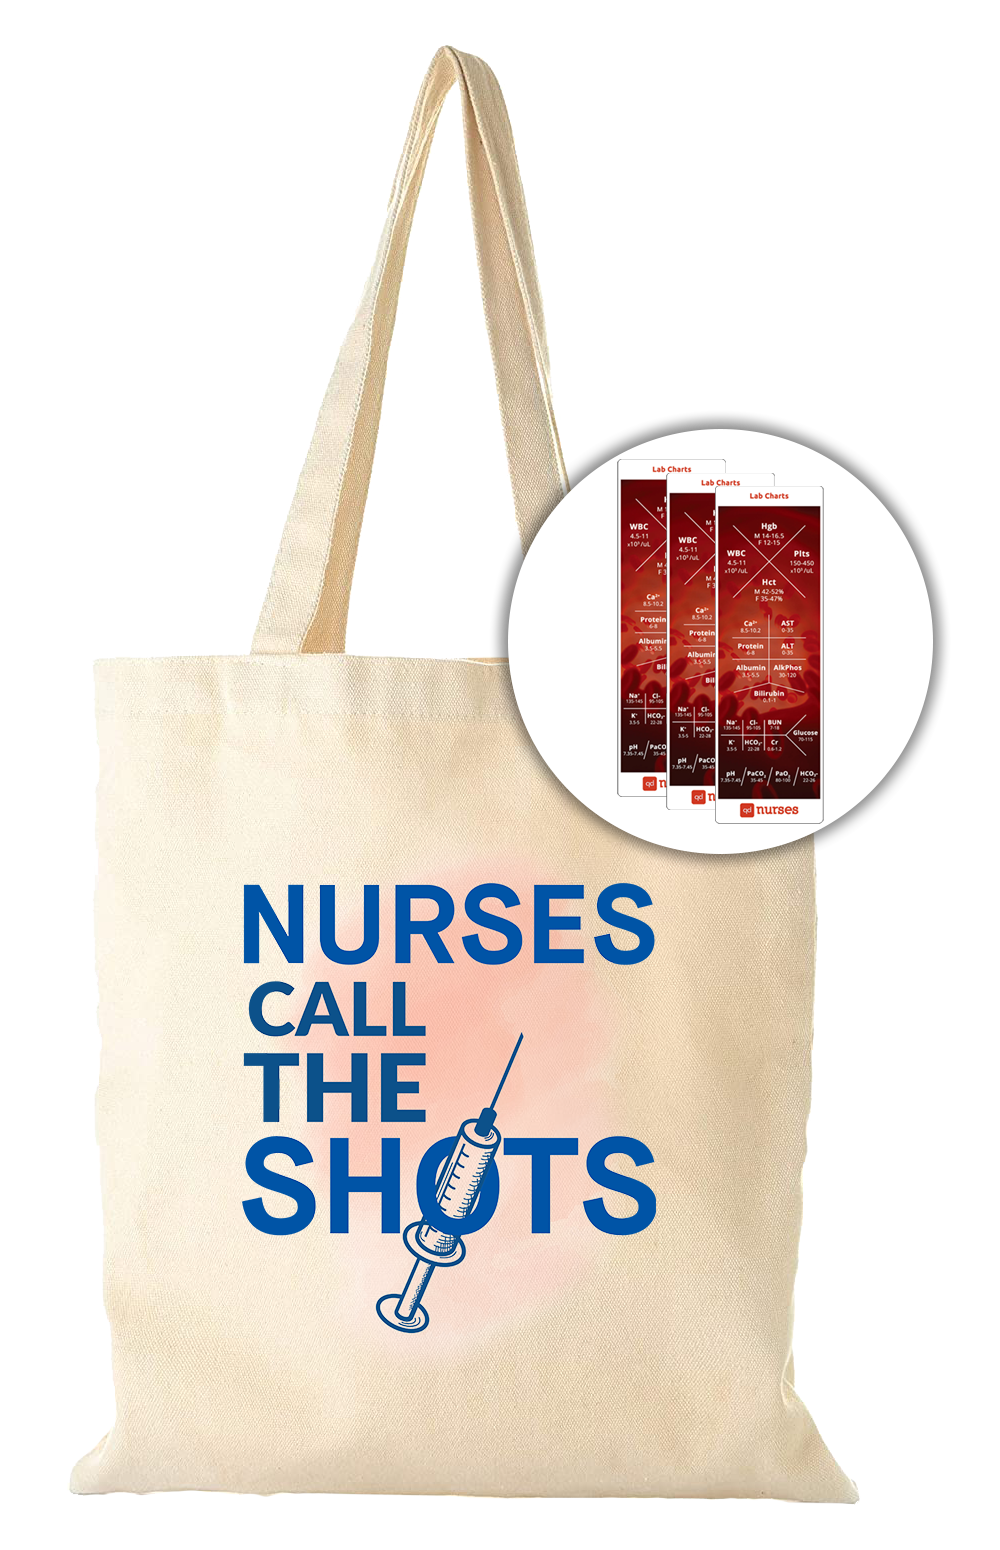 Limited-Edition Canvas Tote Bag and 3x Bookmarks